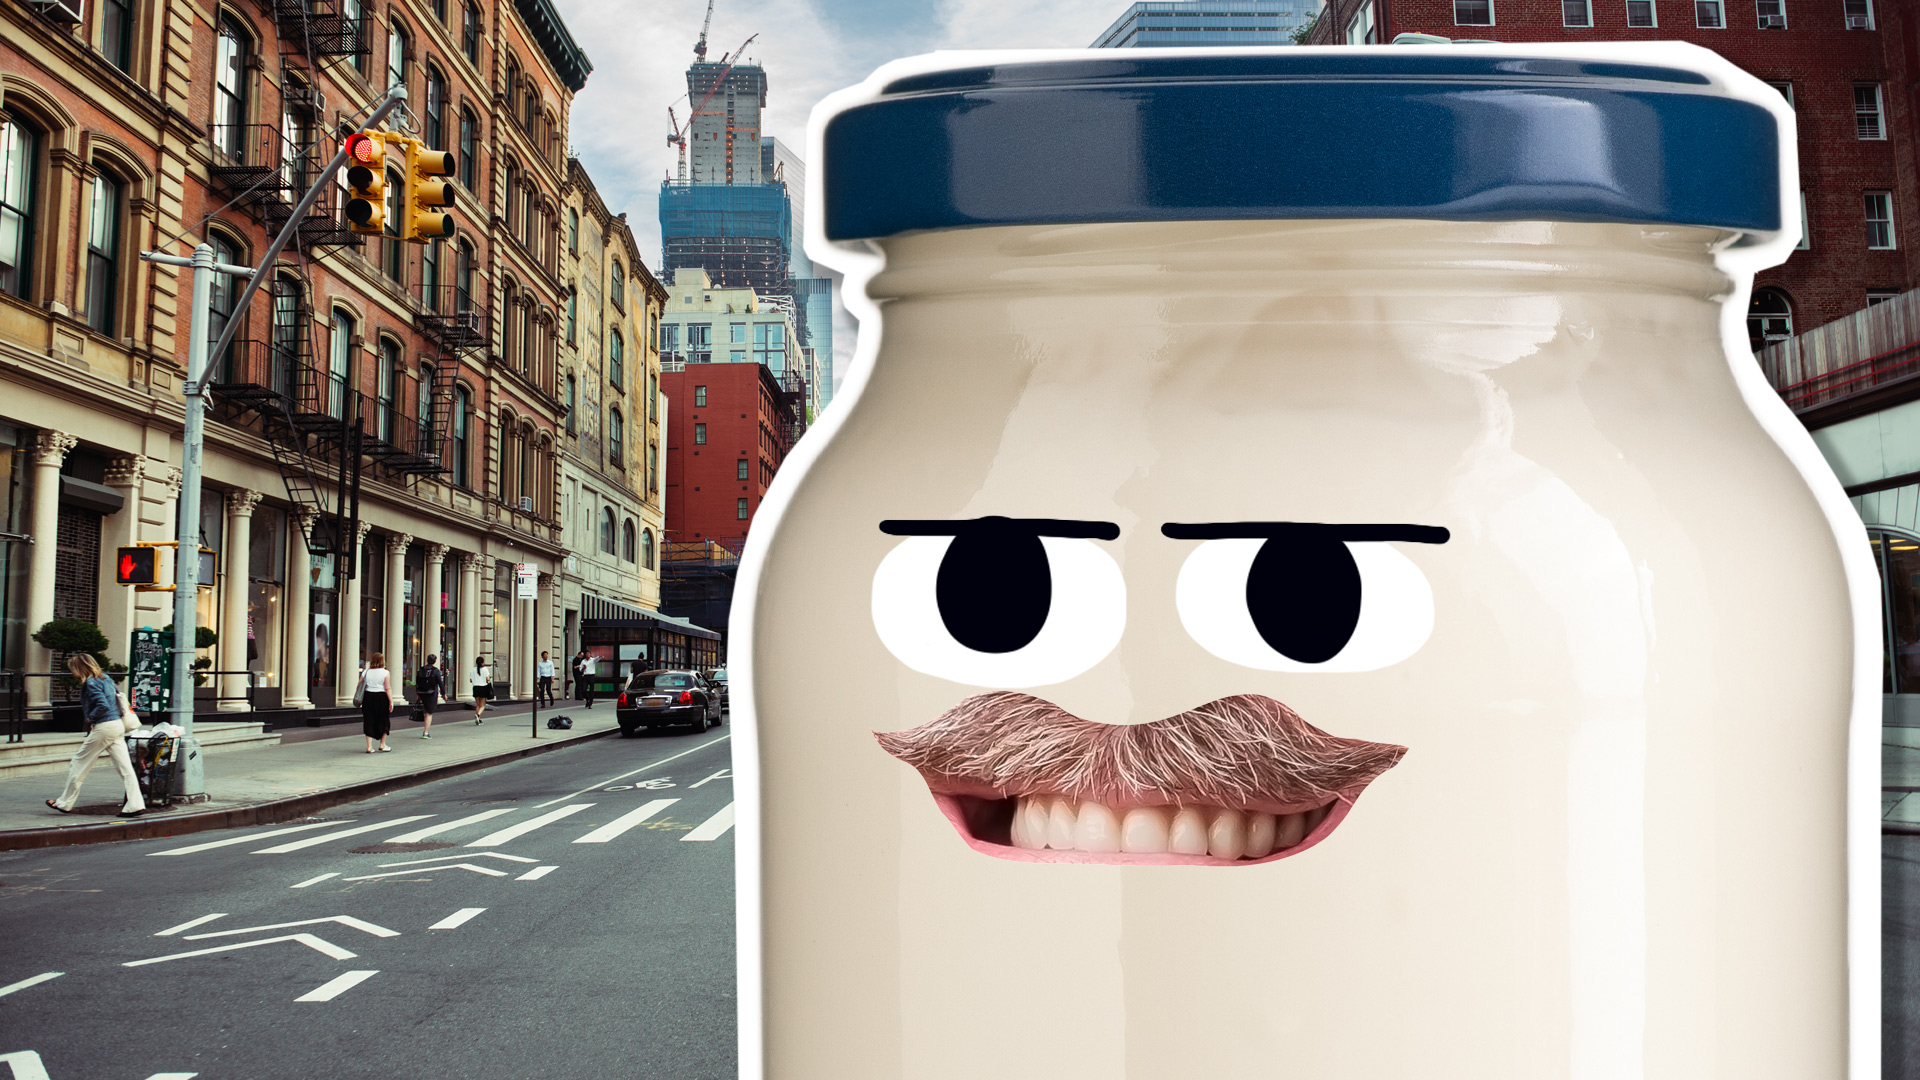 A jar of mayonnaise in a New York street